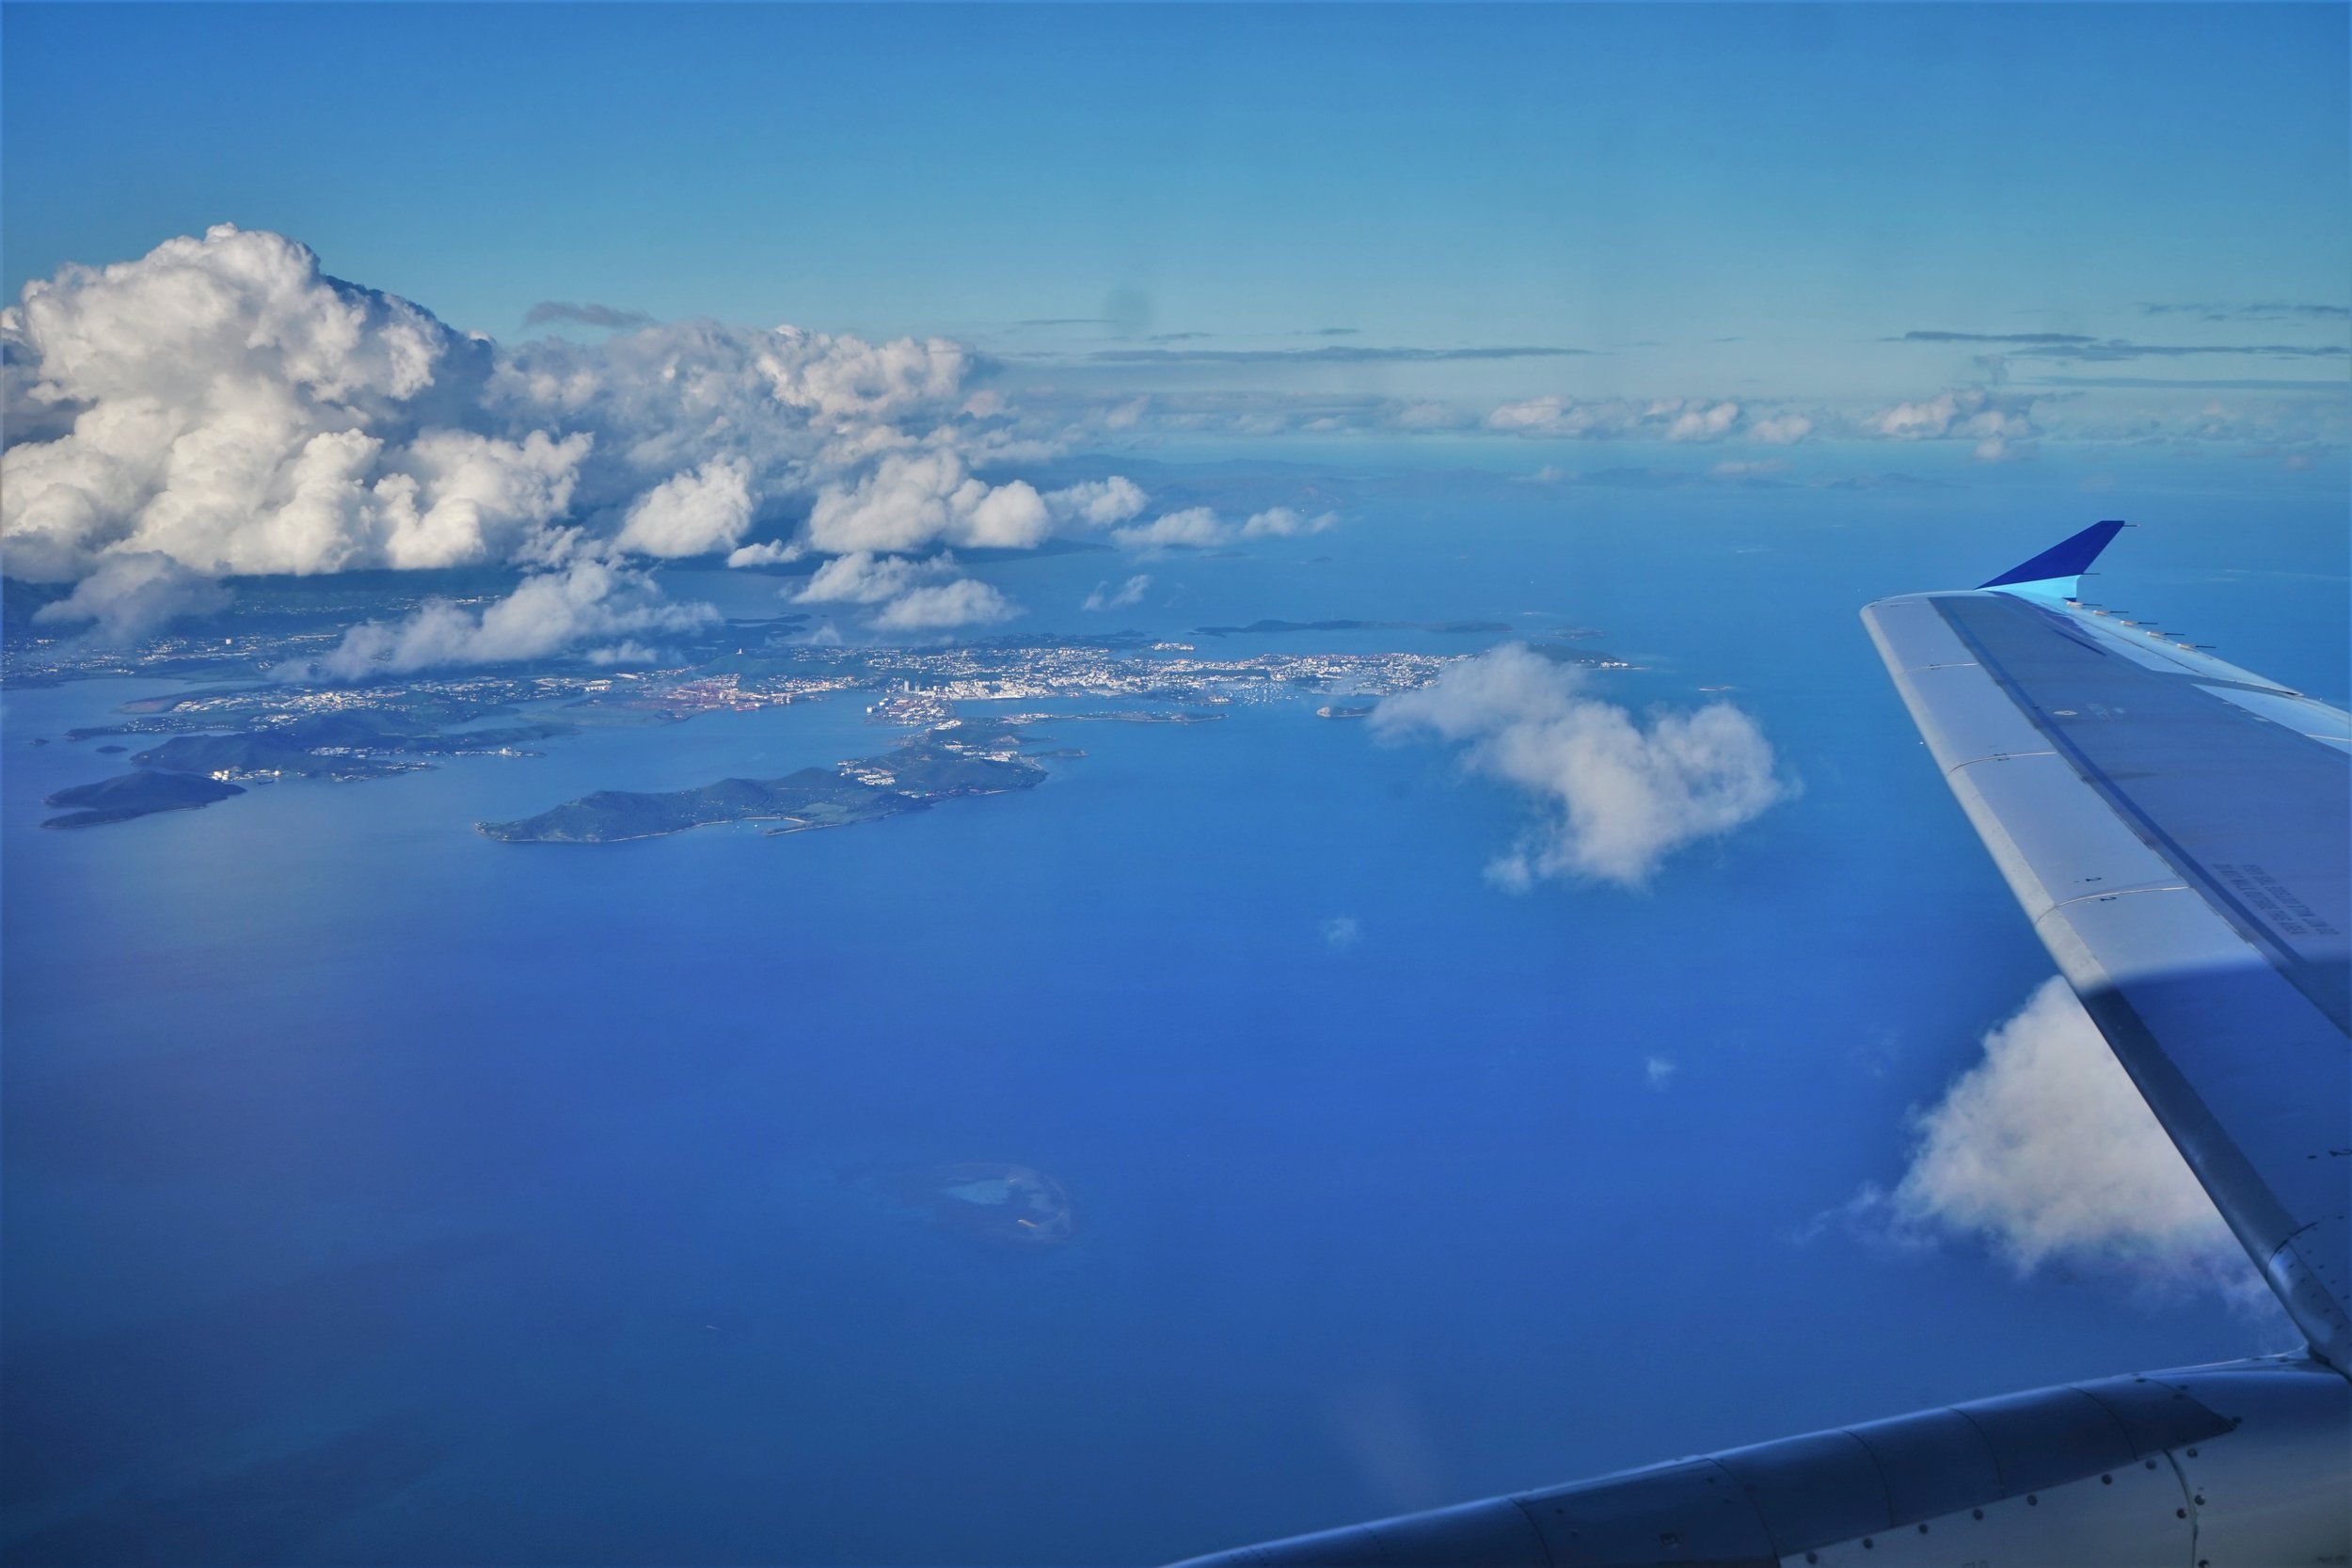 Beautiful views of New Caledonia from the plane. Flying to one of the smaller islands is a recommended New Caledonia travel tip.